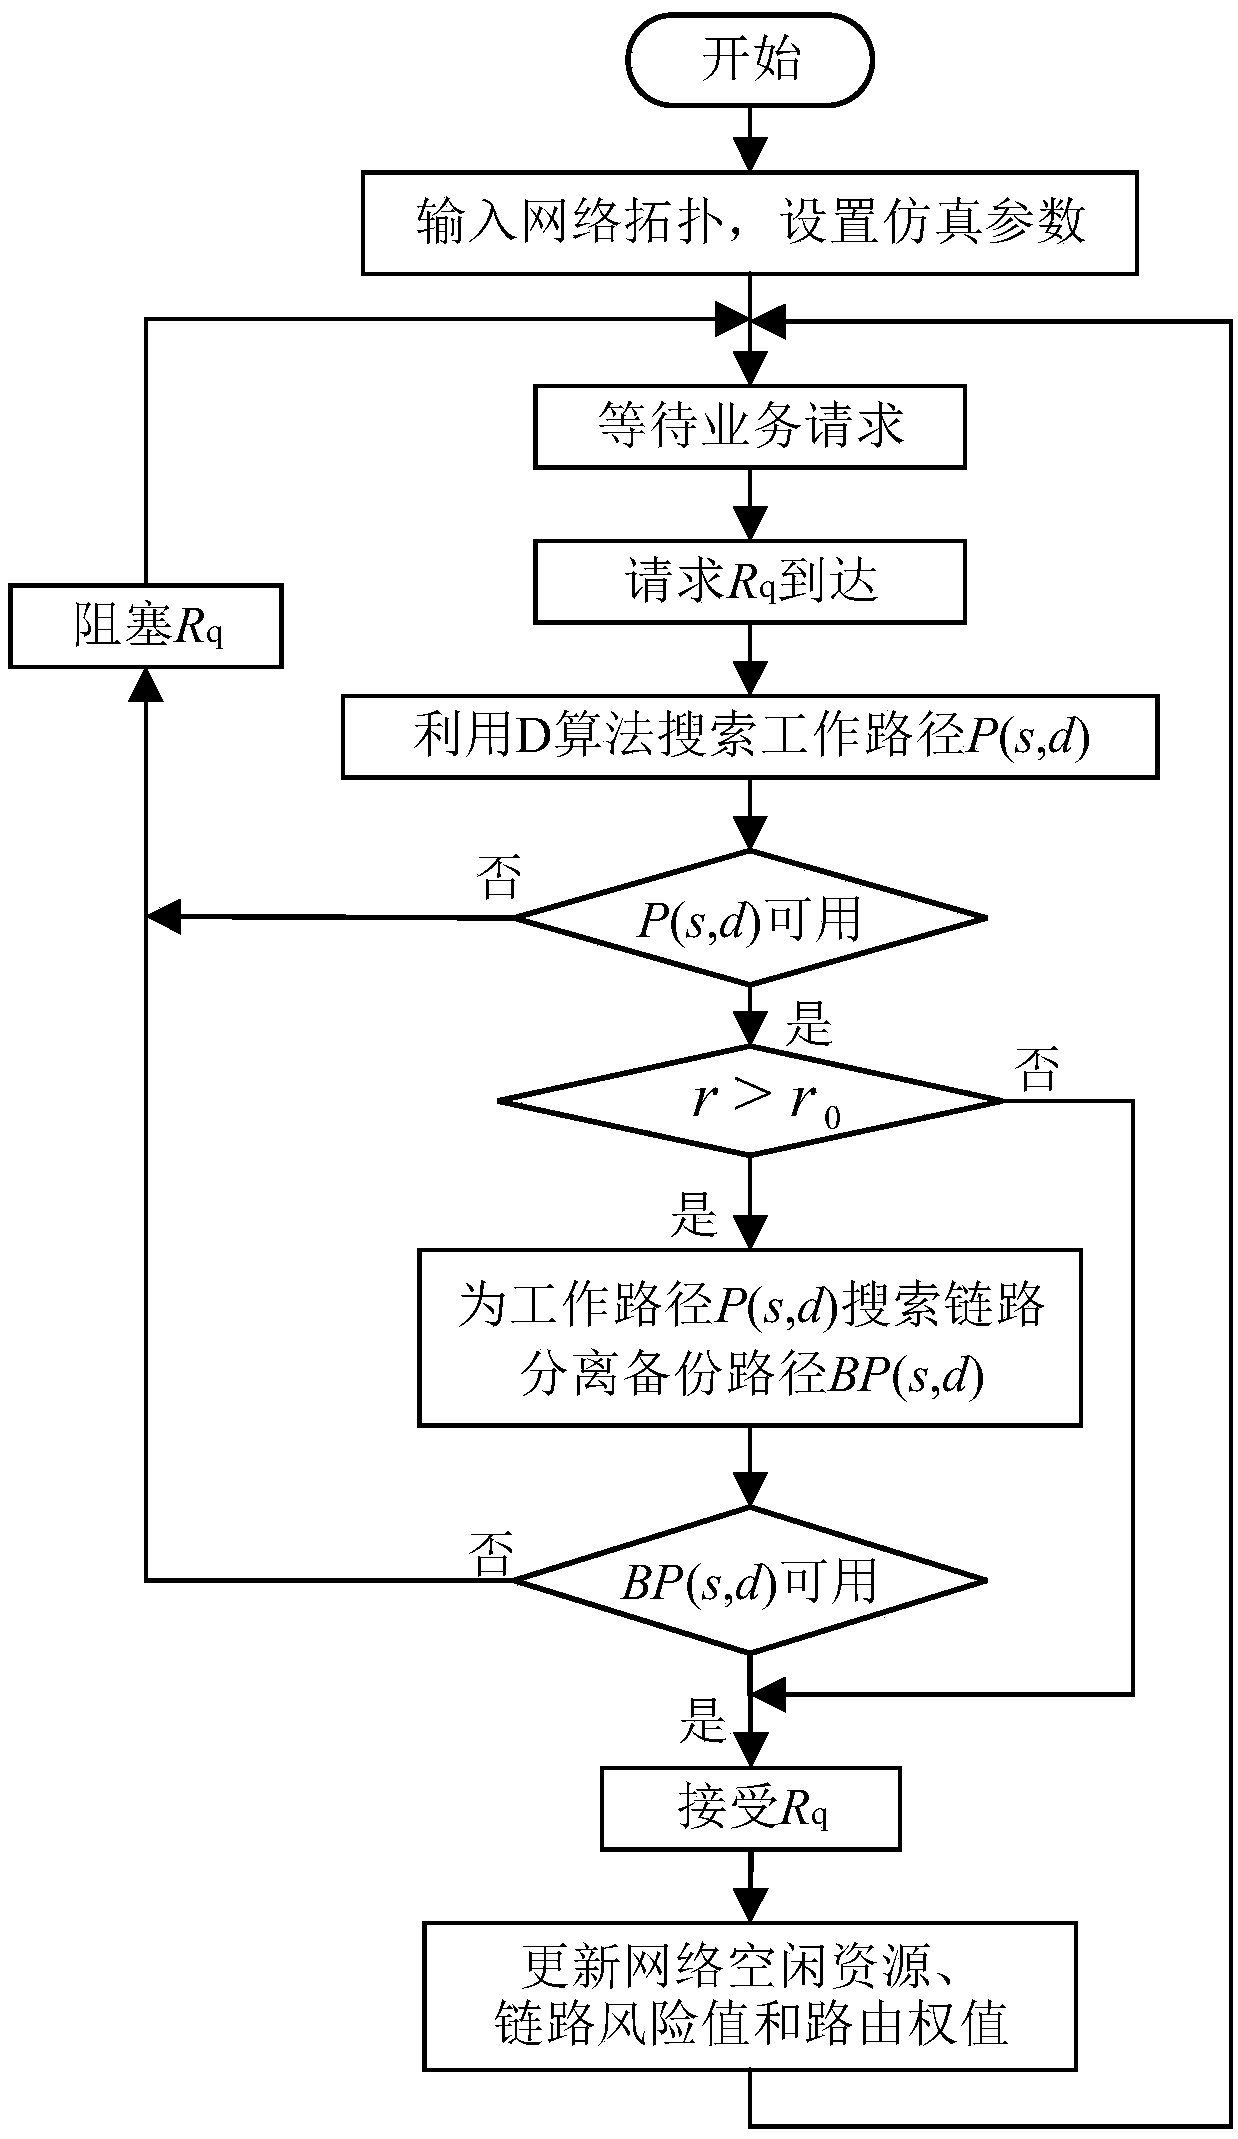 Power communication network routing method for joint balance of load traffic and service risks